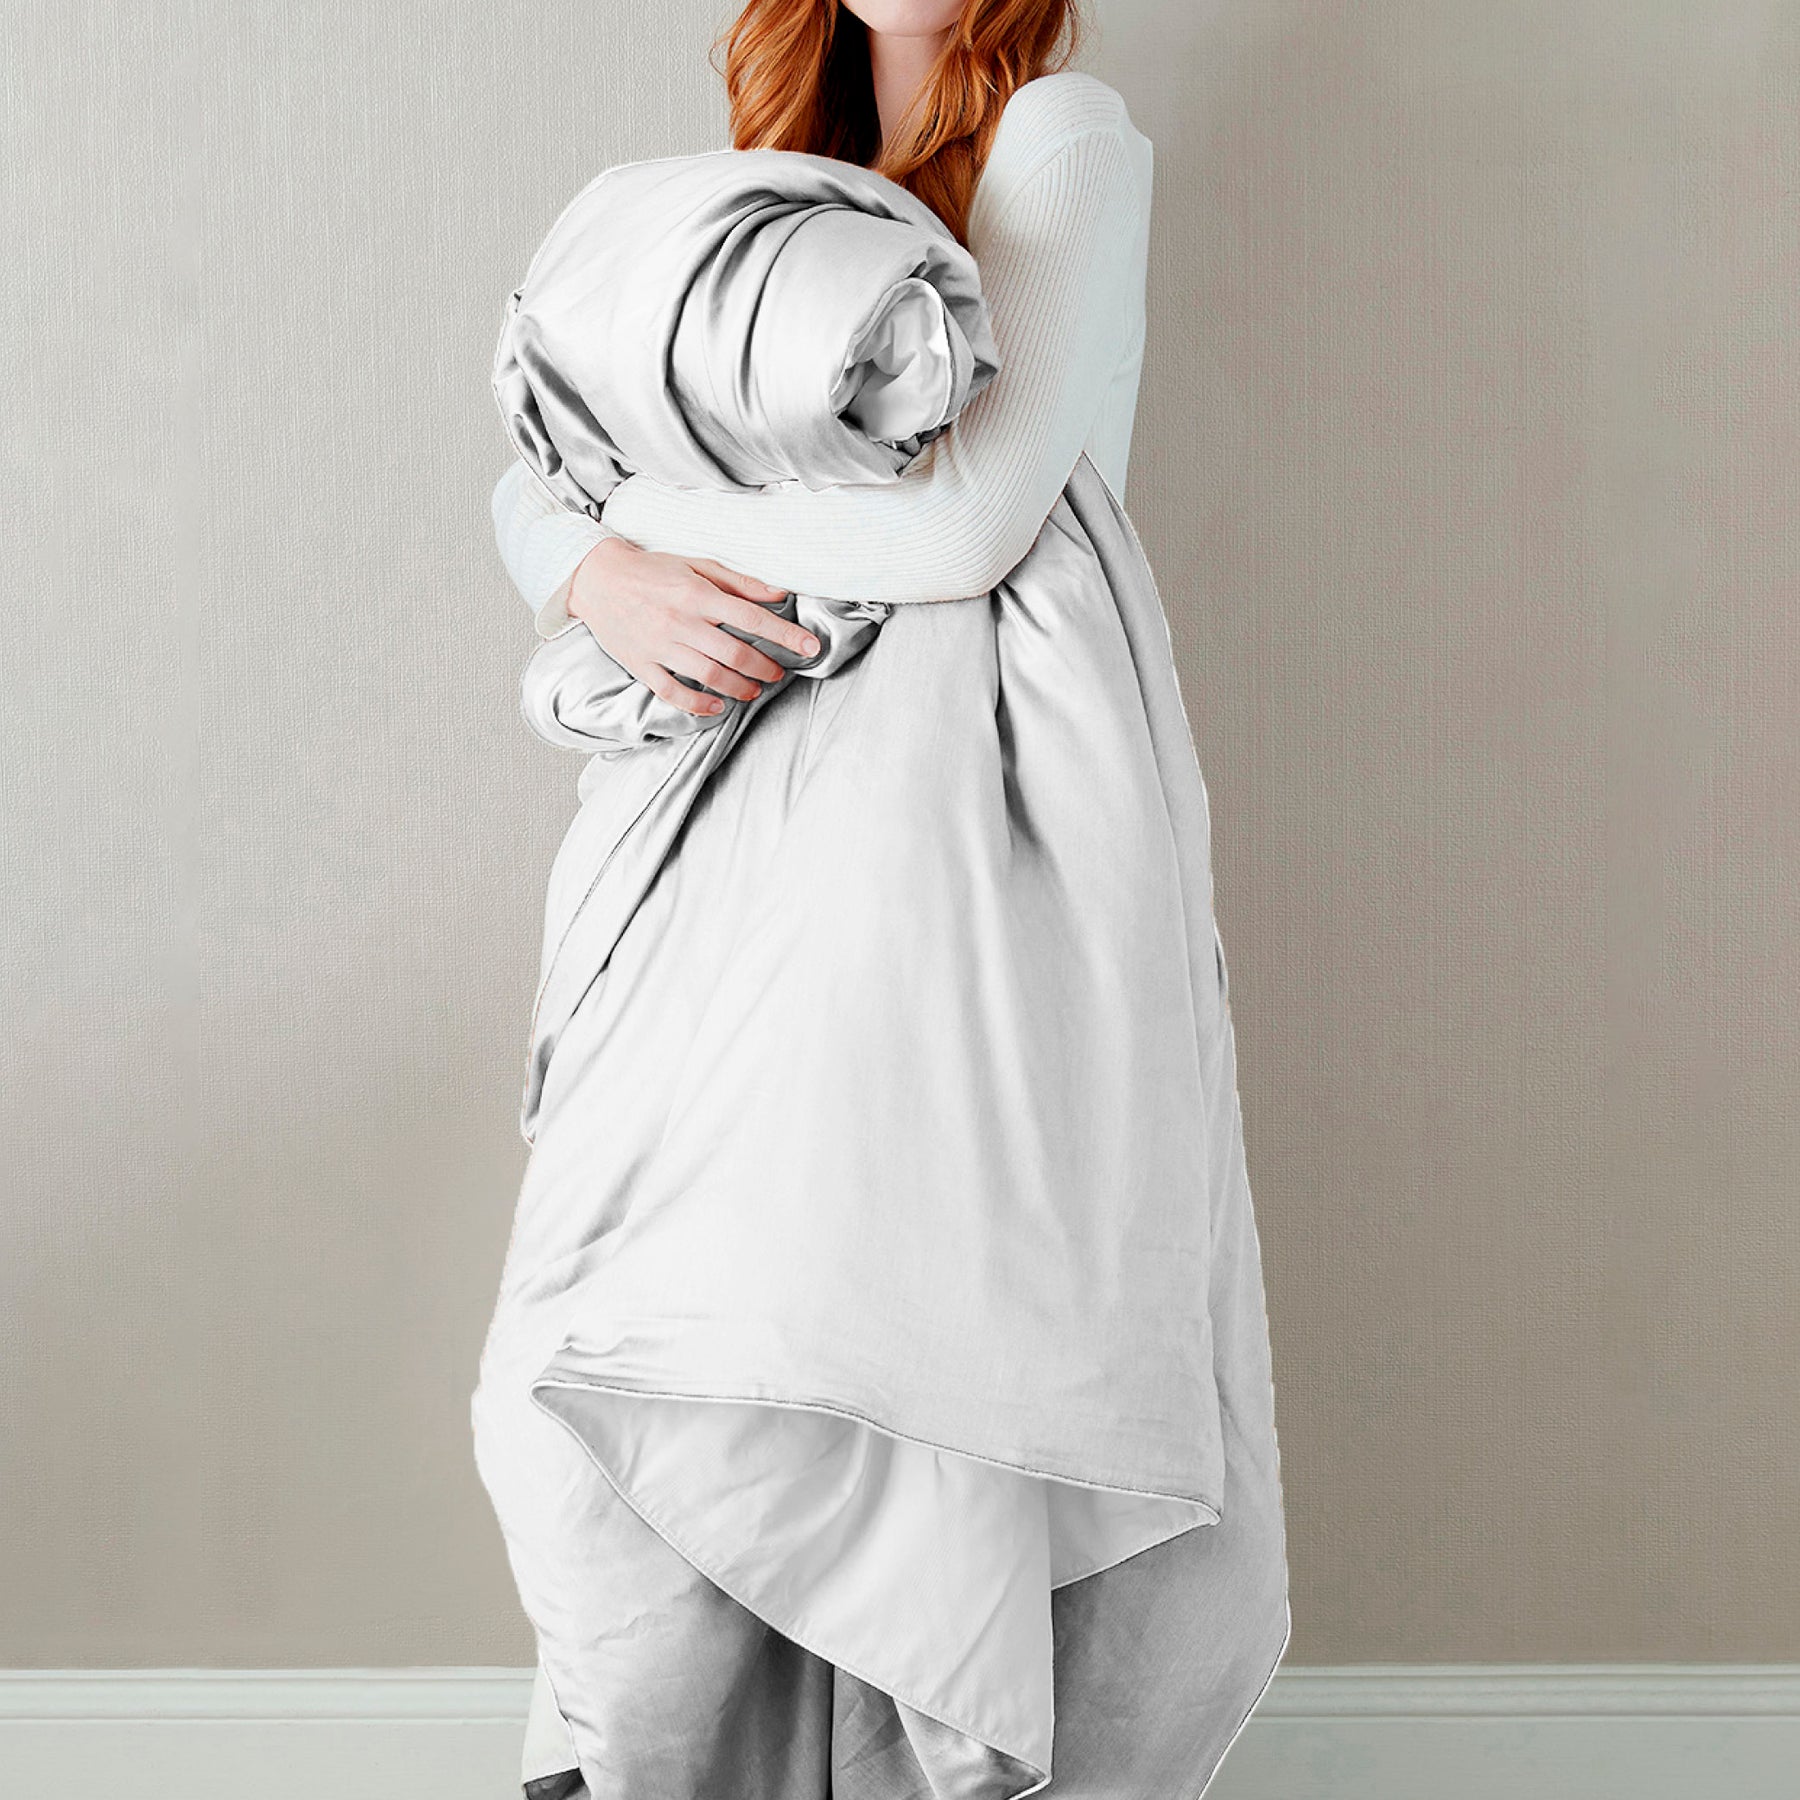 Image of a woman standing and holding the White Soft Touch Duvet Cover against her